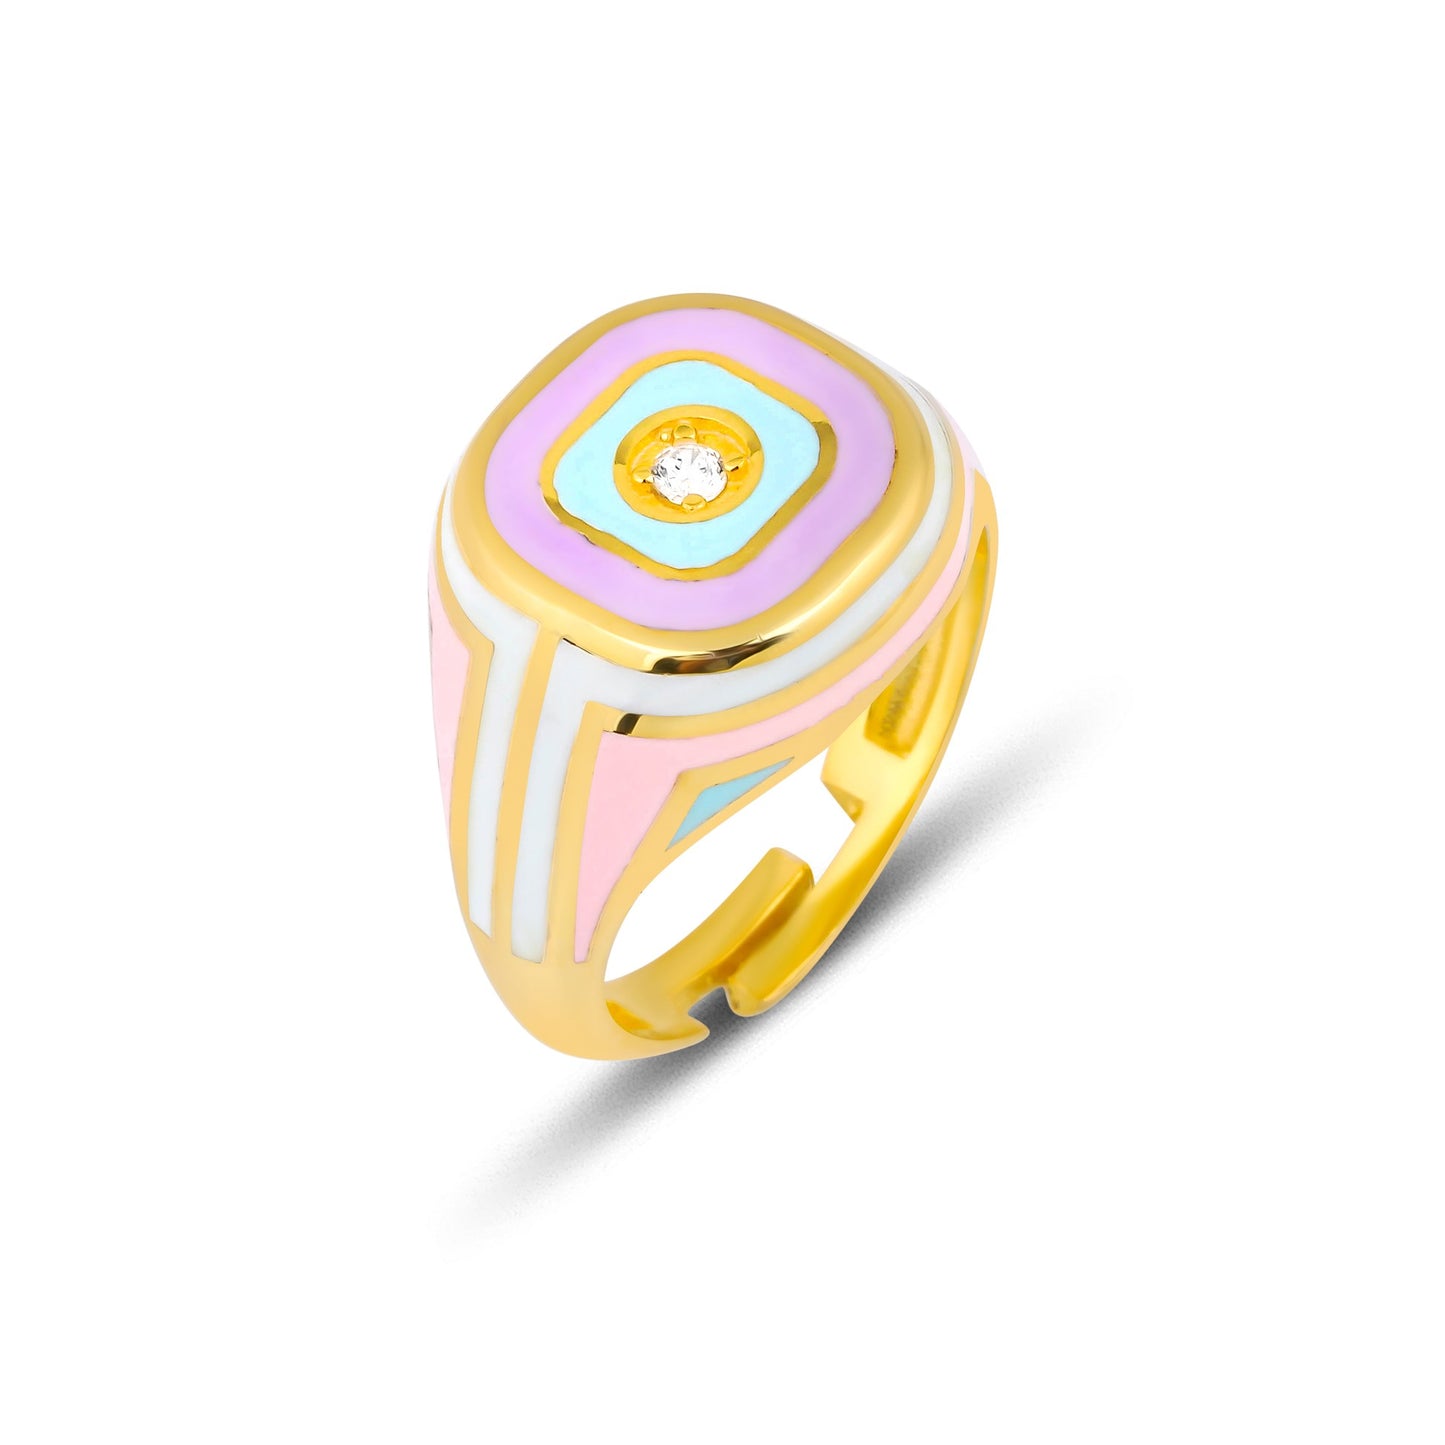 Adjustable Silver Ring with Colored Enamel